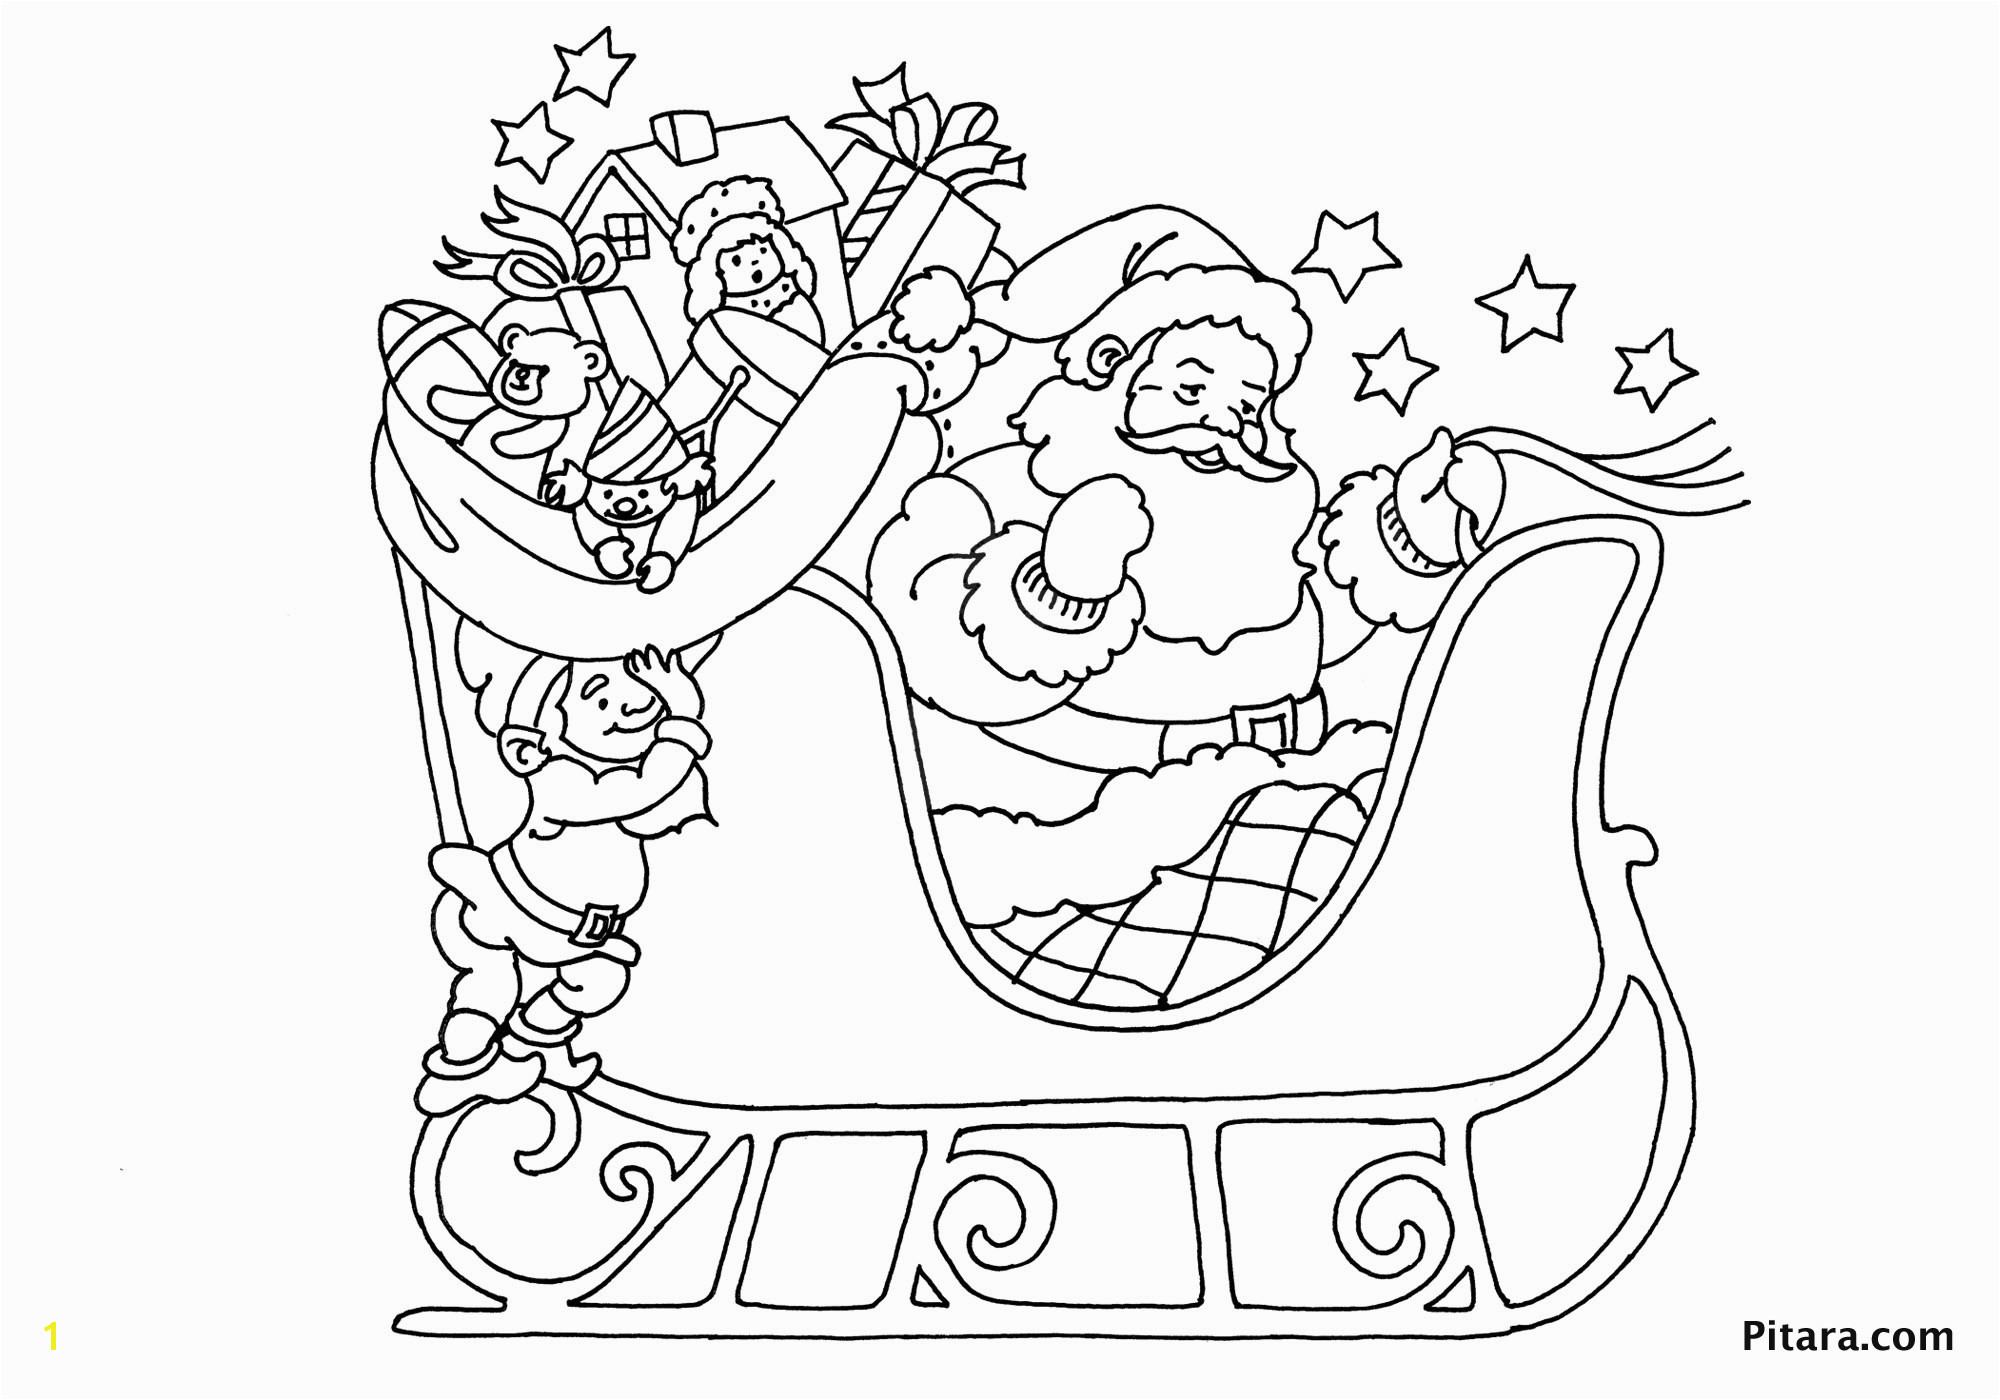 Santa Claus On His Sleigh Coloring Pages Christmas Coloring Pages for Kids